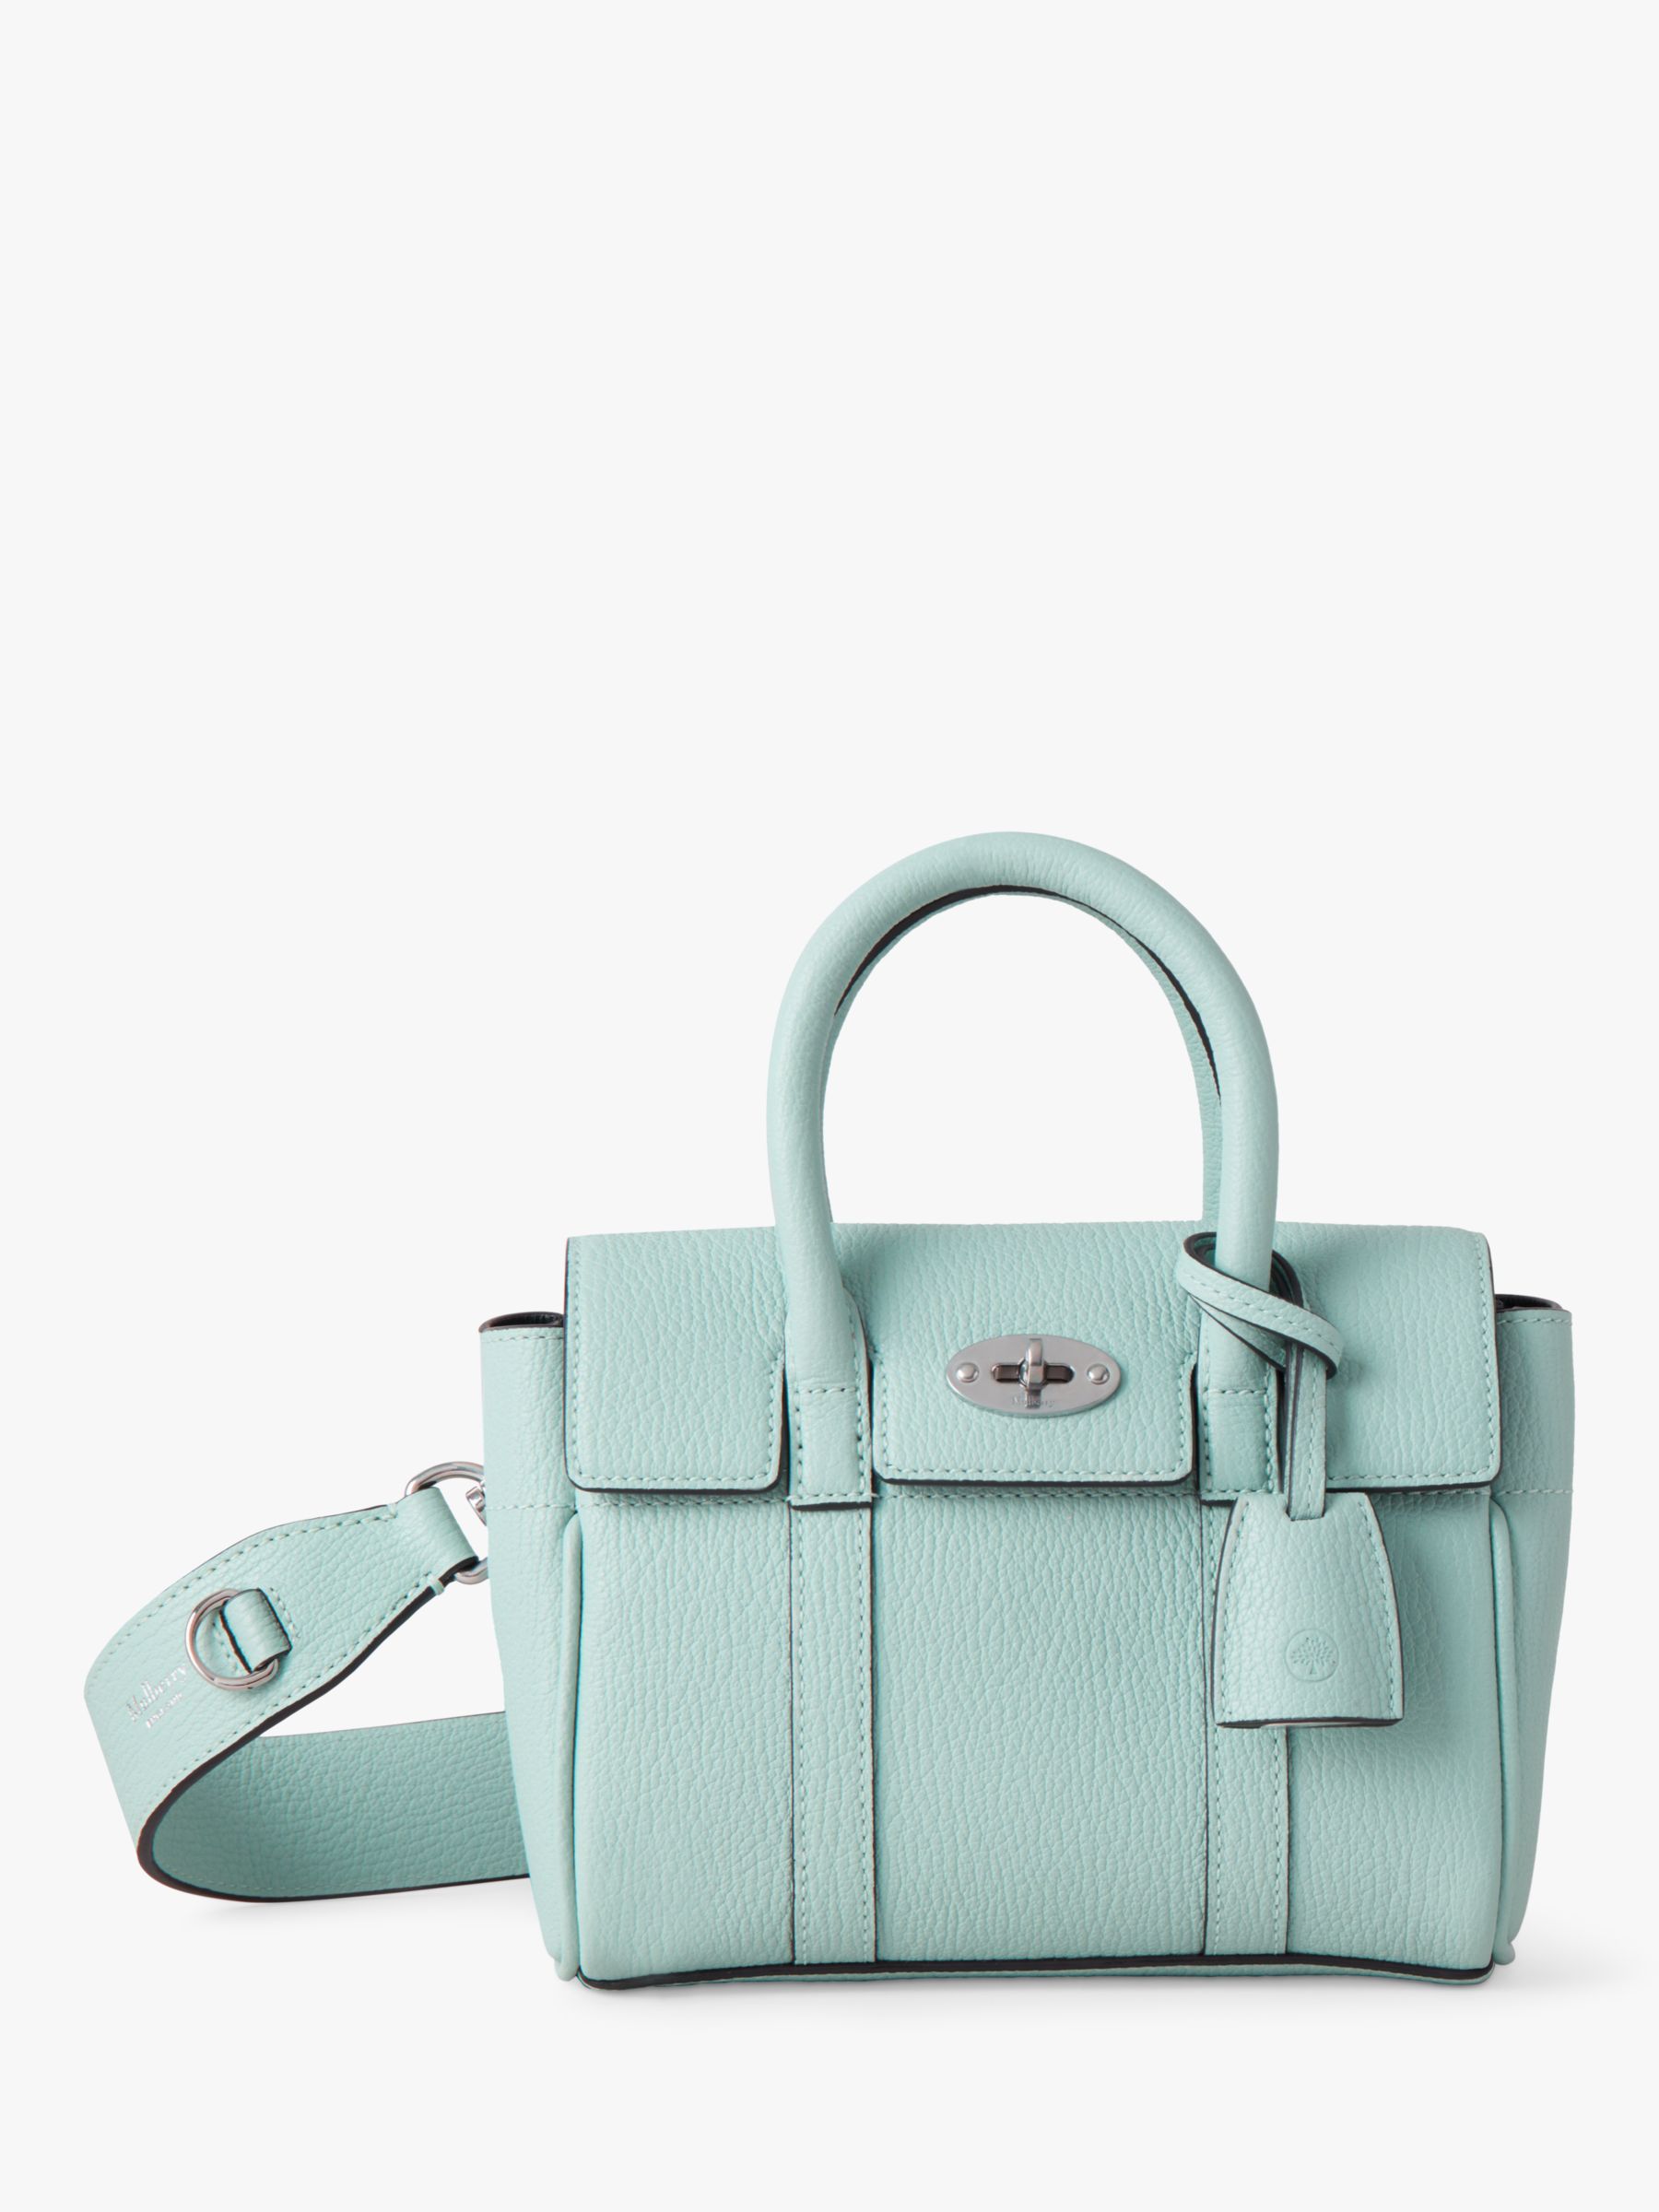 Mulberry Mini Bayswater Goat Leather Tote Bag